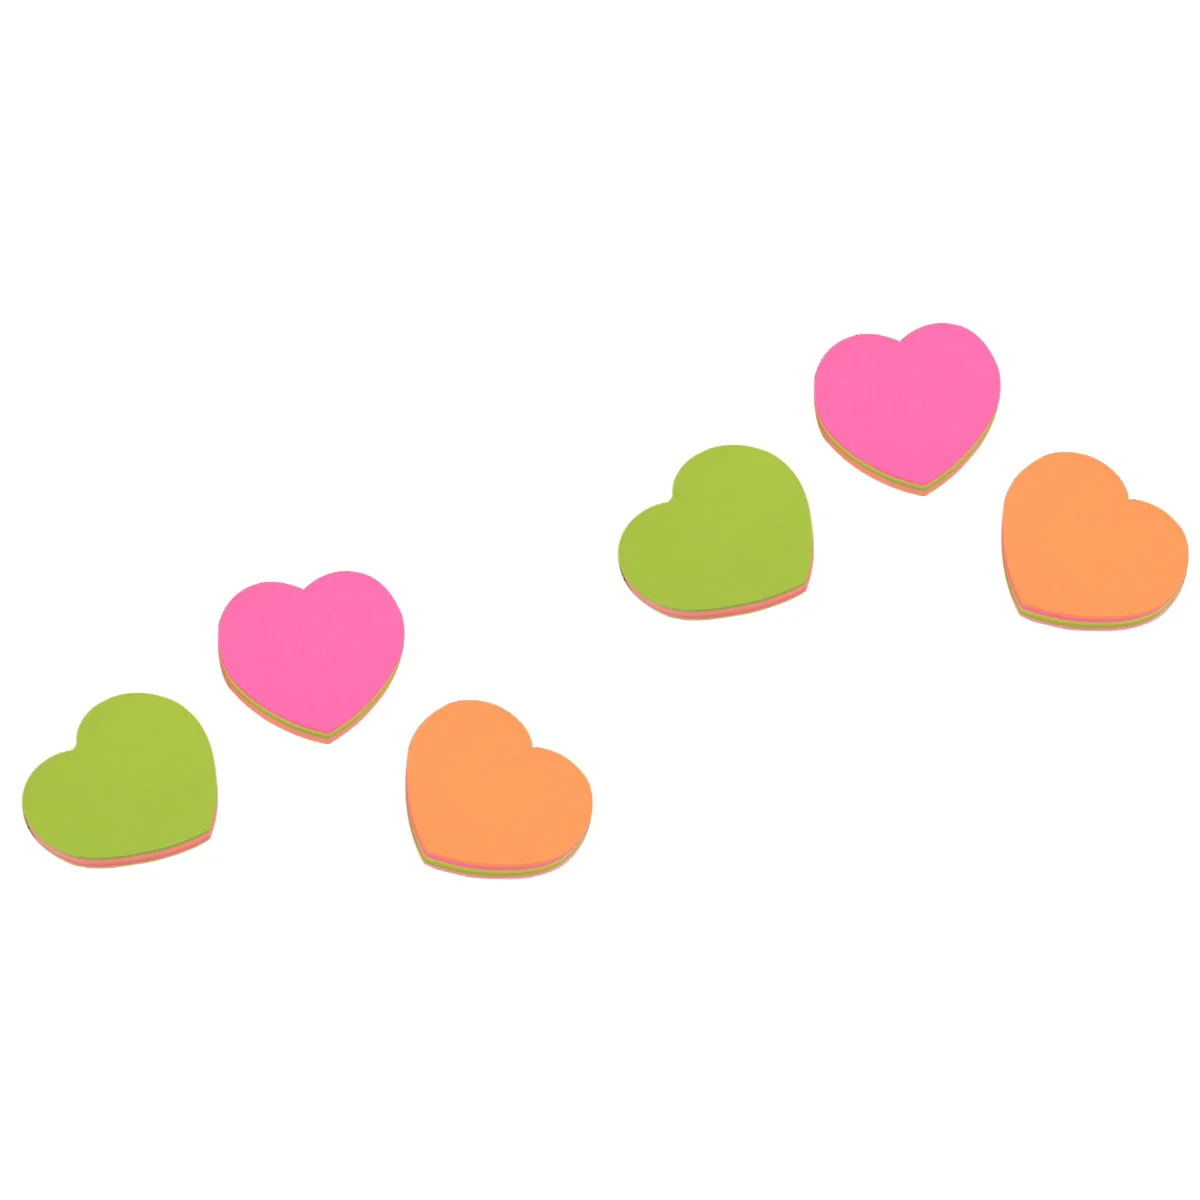 

6 pcs Heart-shaped Sticky Pads Posted Self-Adhesive Paper Notes Facilitated Stickers Notepads